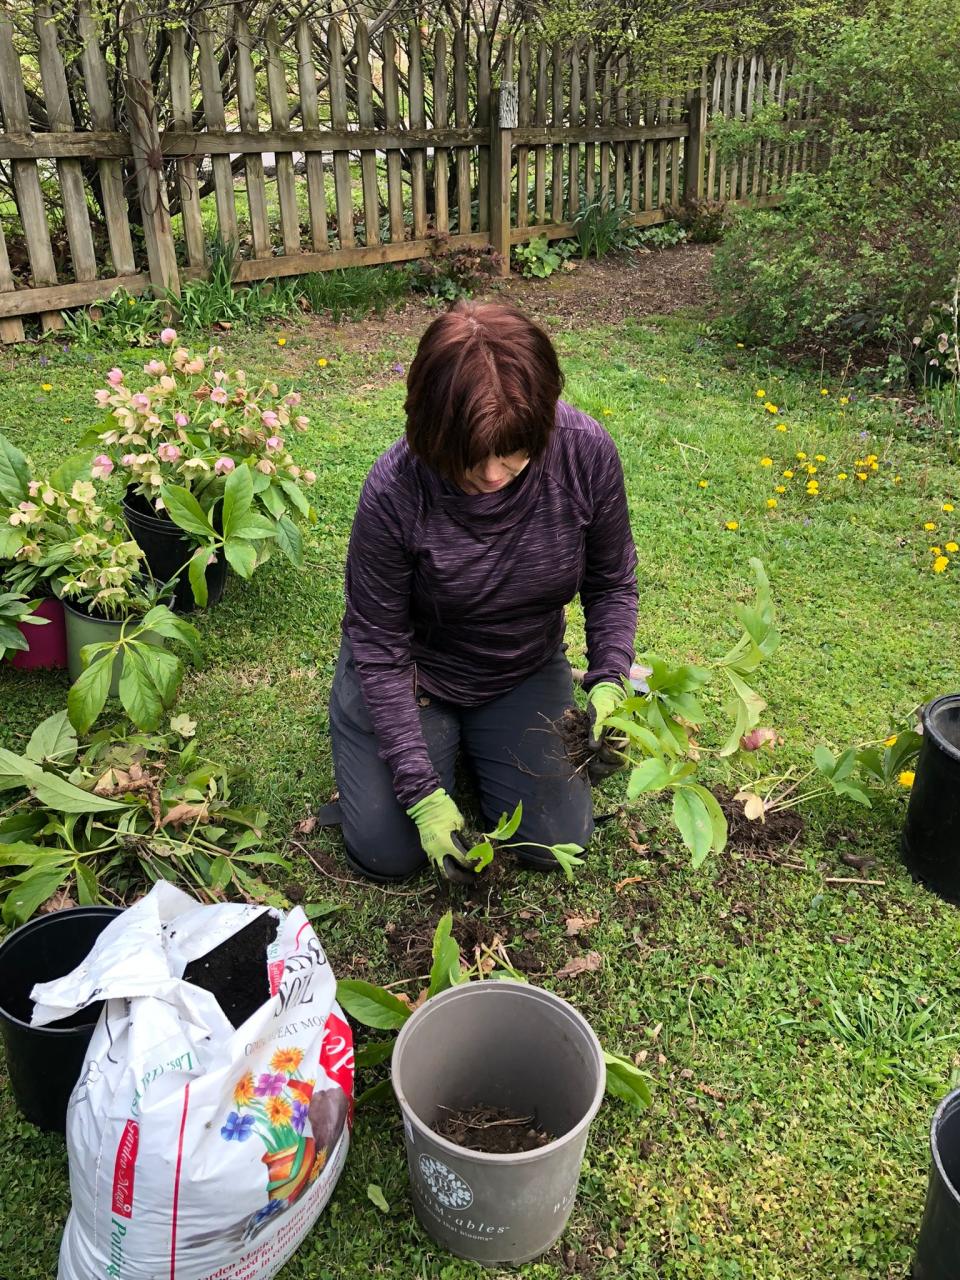 The annual North Hills Garden Club Plant Sale happens this weekend. Here, chair of the event Sally Wilcox digs up some plants for the sale. Because the plants come from residents’ own yards, buyers may find items that are not available at garden stores. March 31, 2022